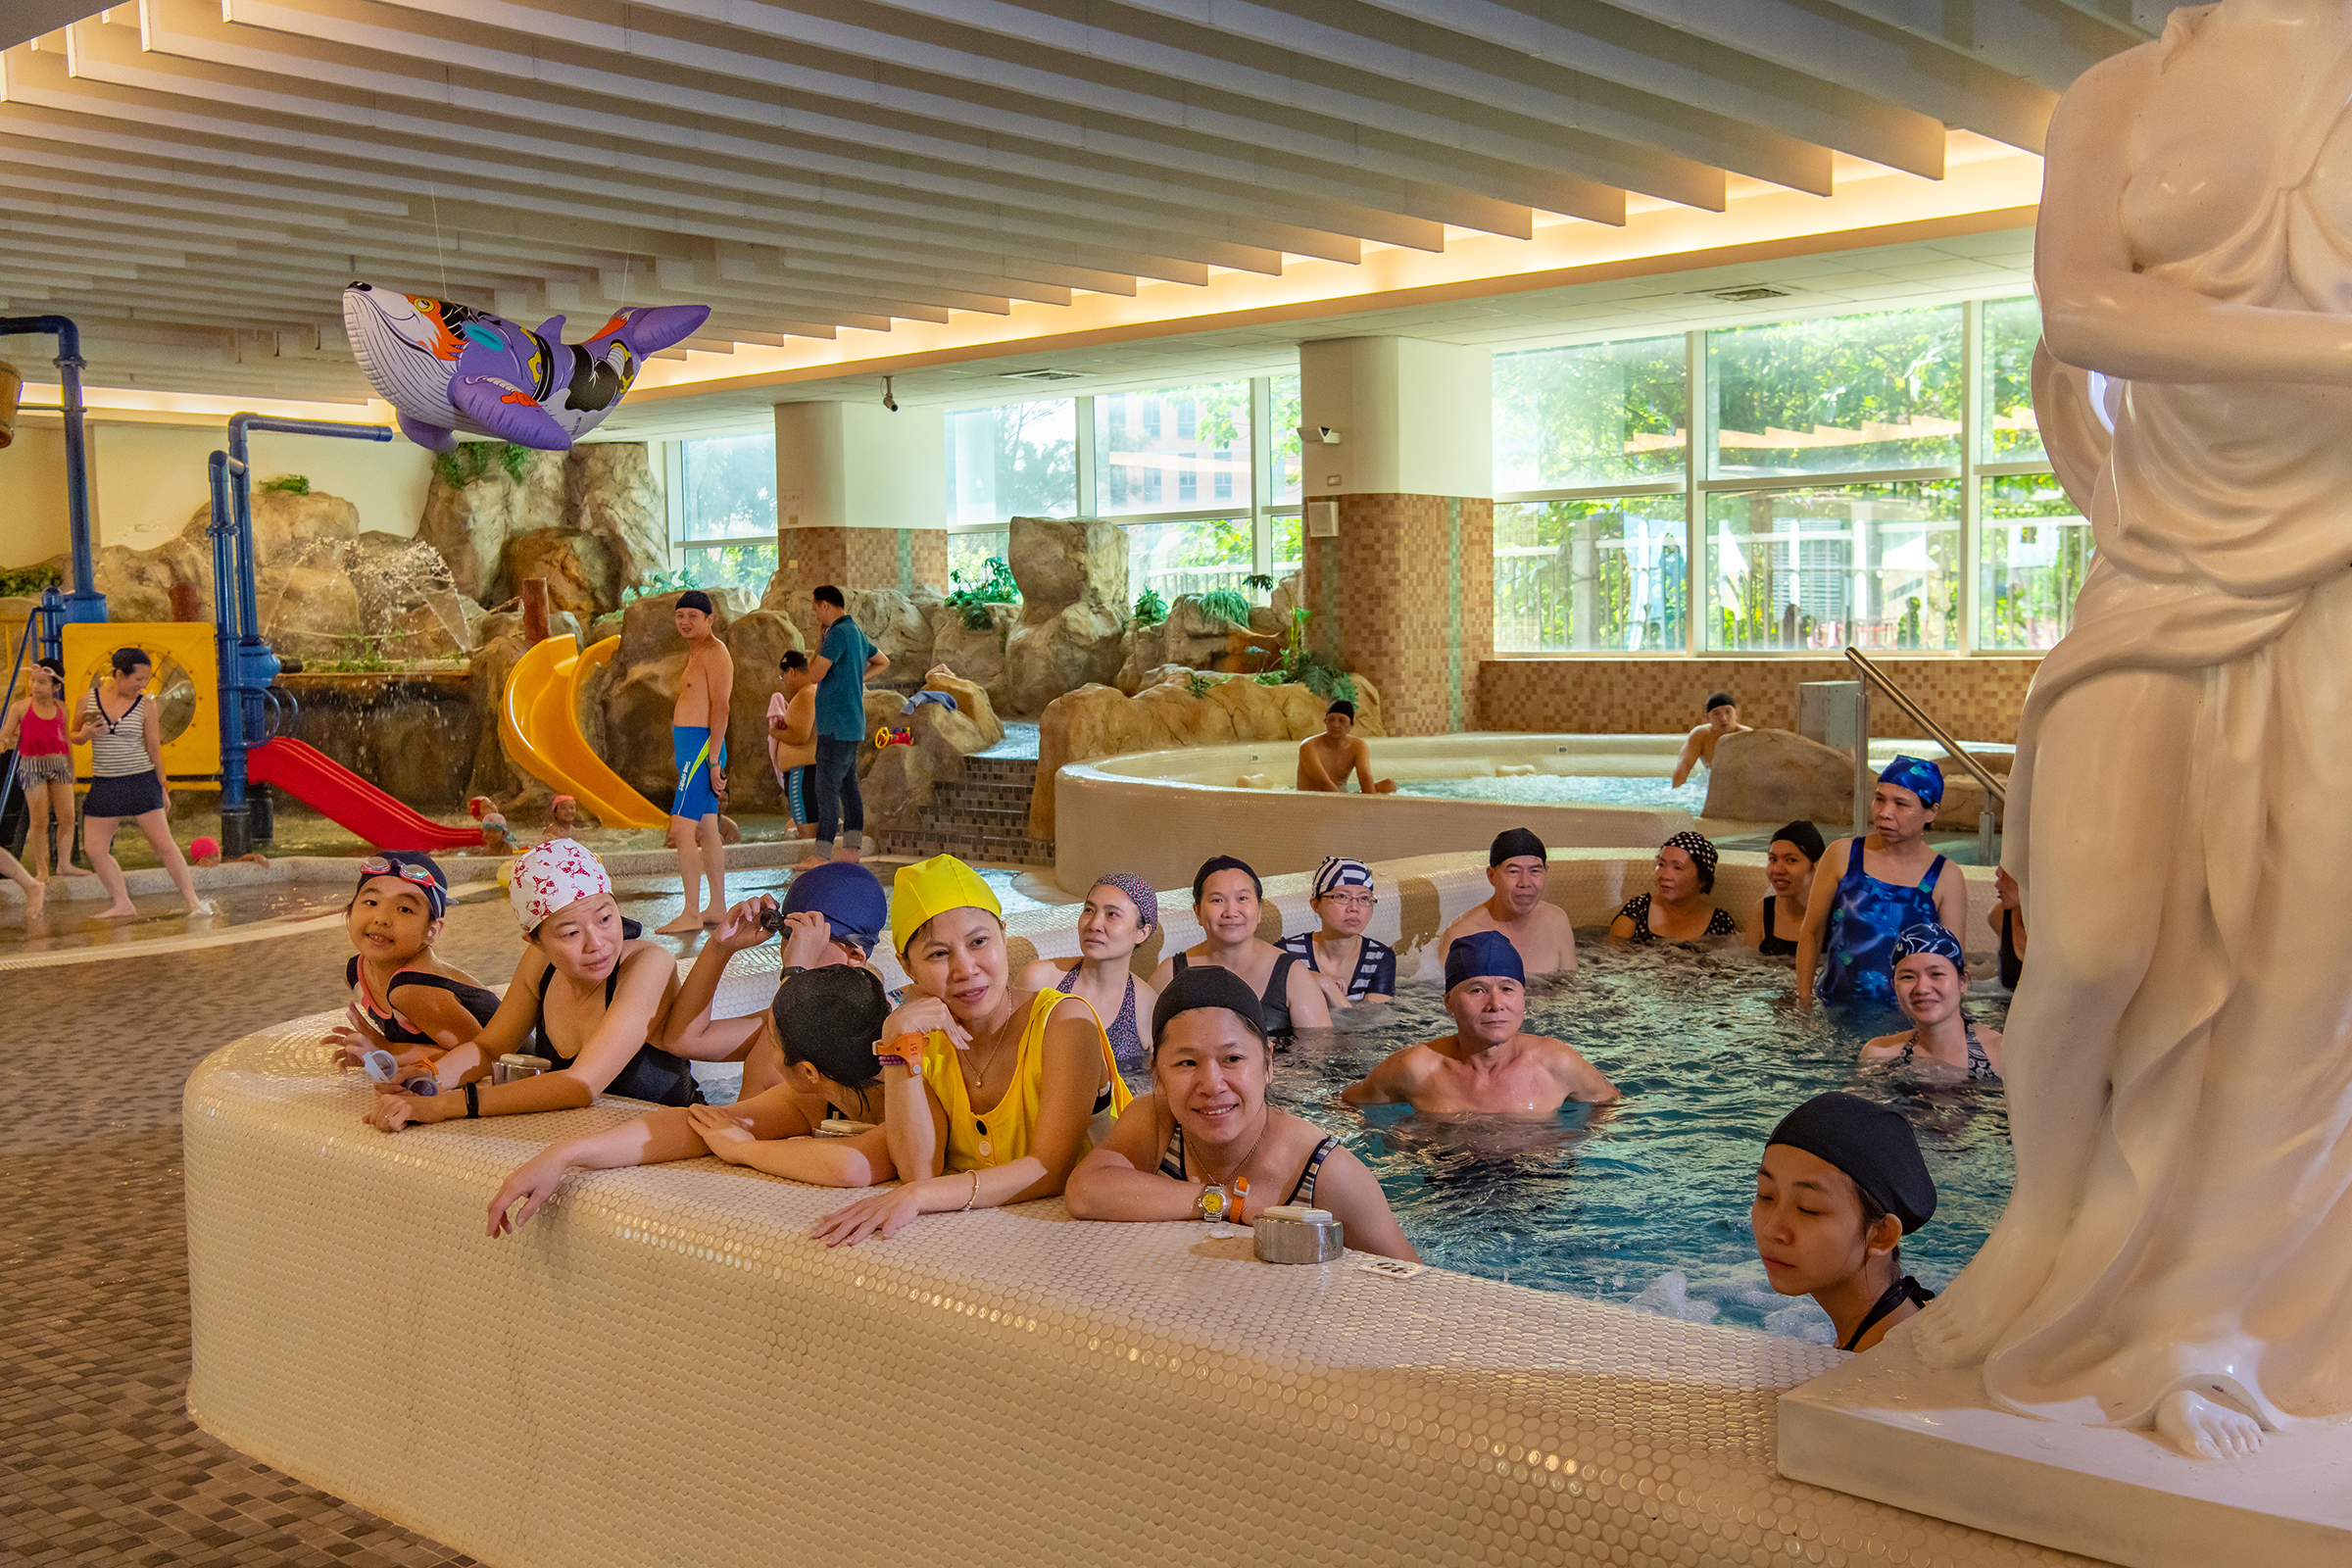 Supporters at a swimming pool wait for the President's arrival during a visit on Oct. 5. (Billy H.C. Kwok for TIME)